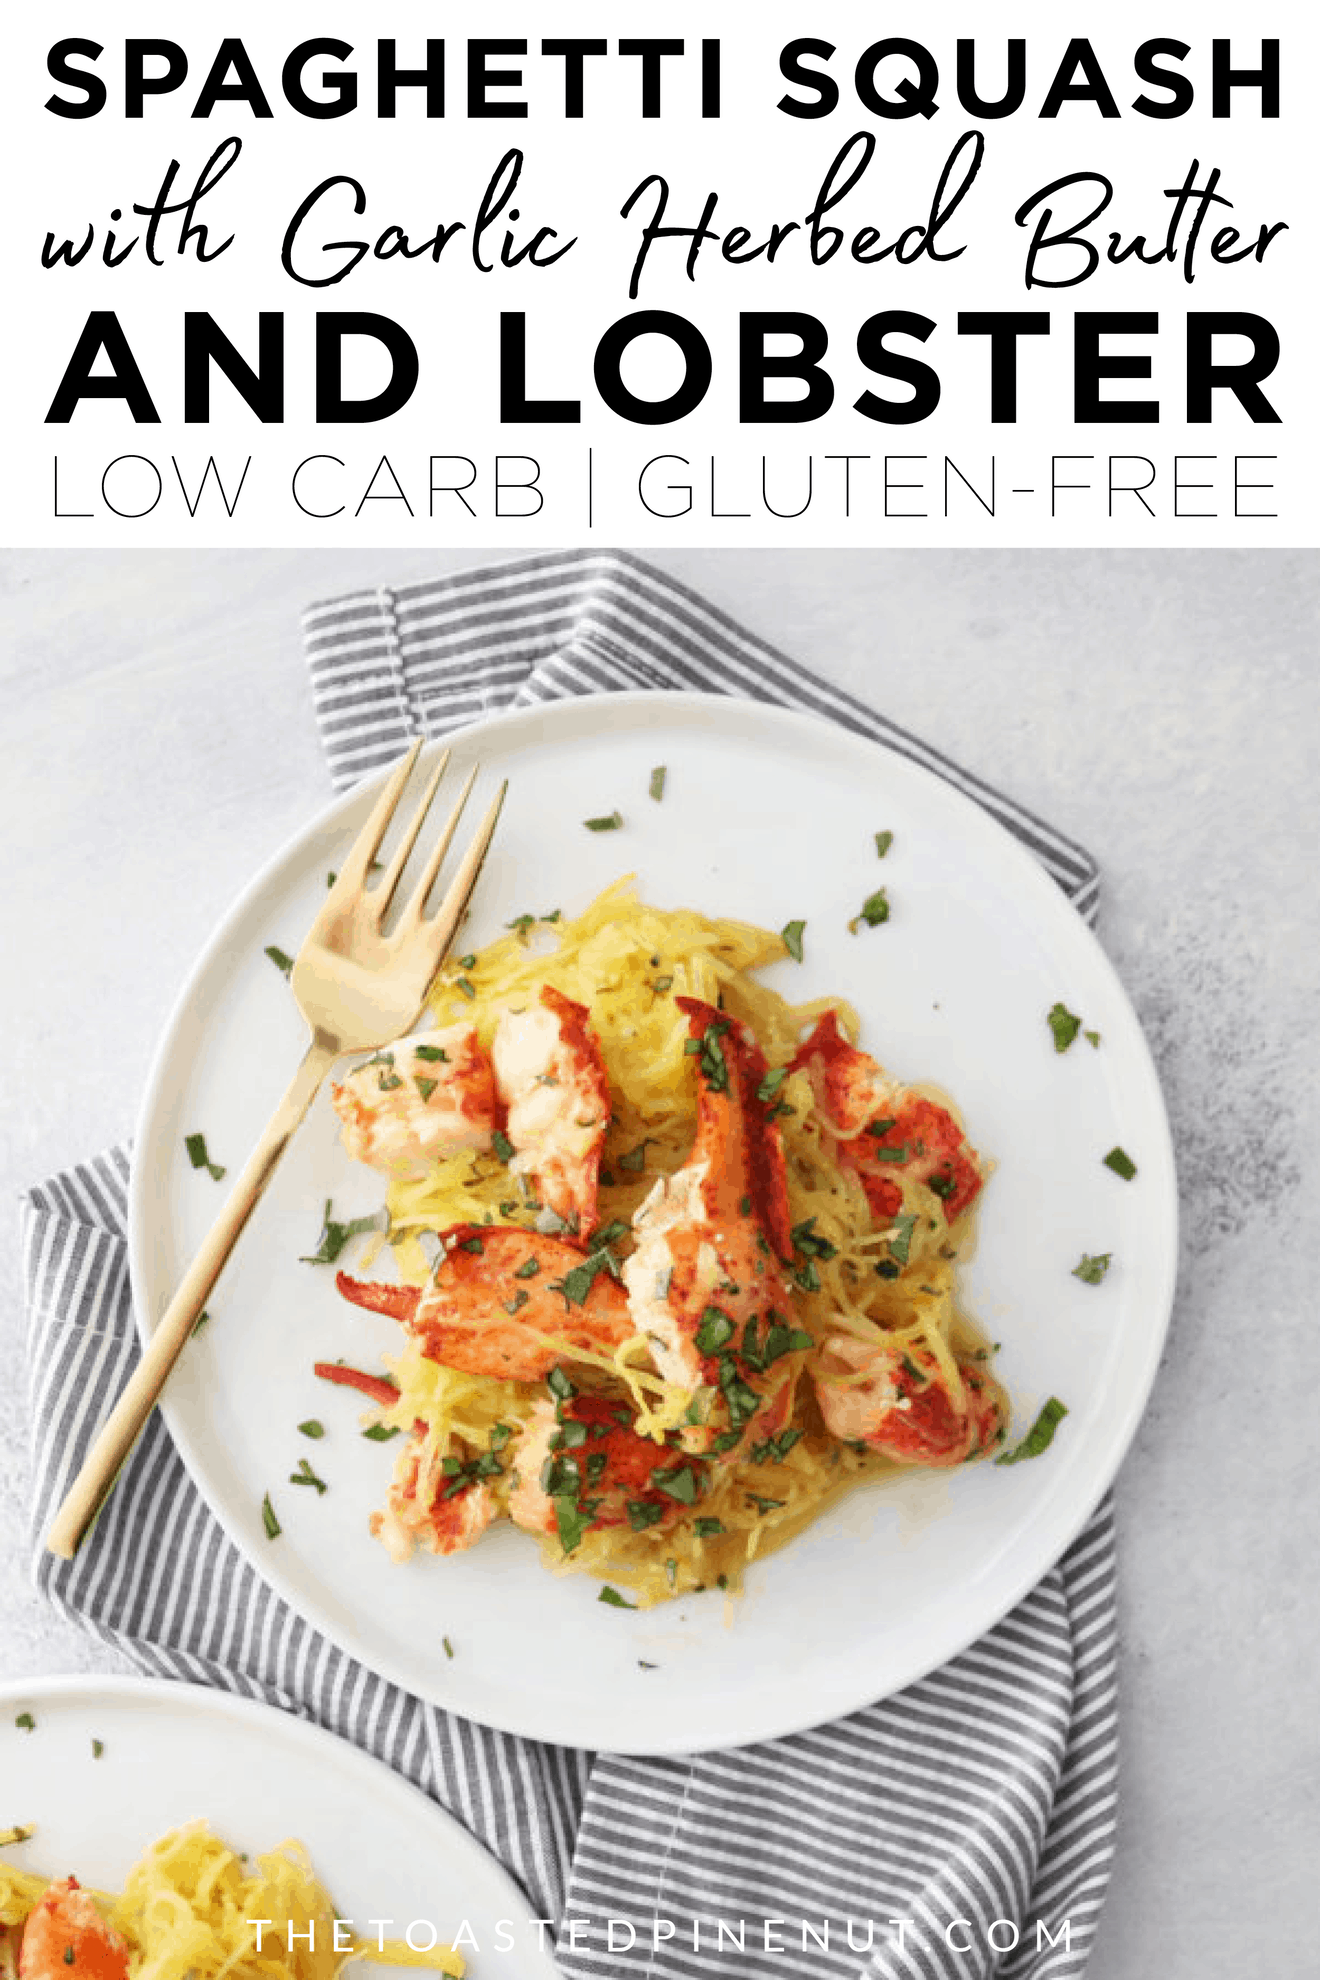 This lobster recipe is so delicious, decadent, easy, and flavorful! Low carb and gluten free, this is a lightened up meal that doesn't disappoint on flavor! thetoastedpinenut.com #thetoastedpinenut #lobster #spaghetti #spaghettisquash #garlicherbbutter #lowcarb #glutenfree #seafood